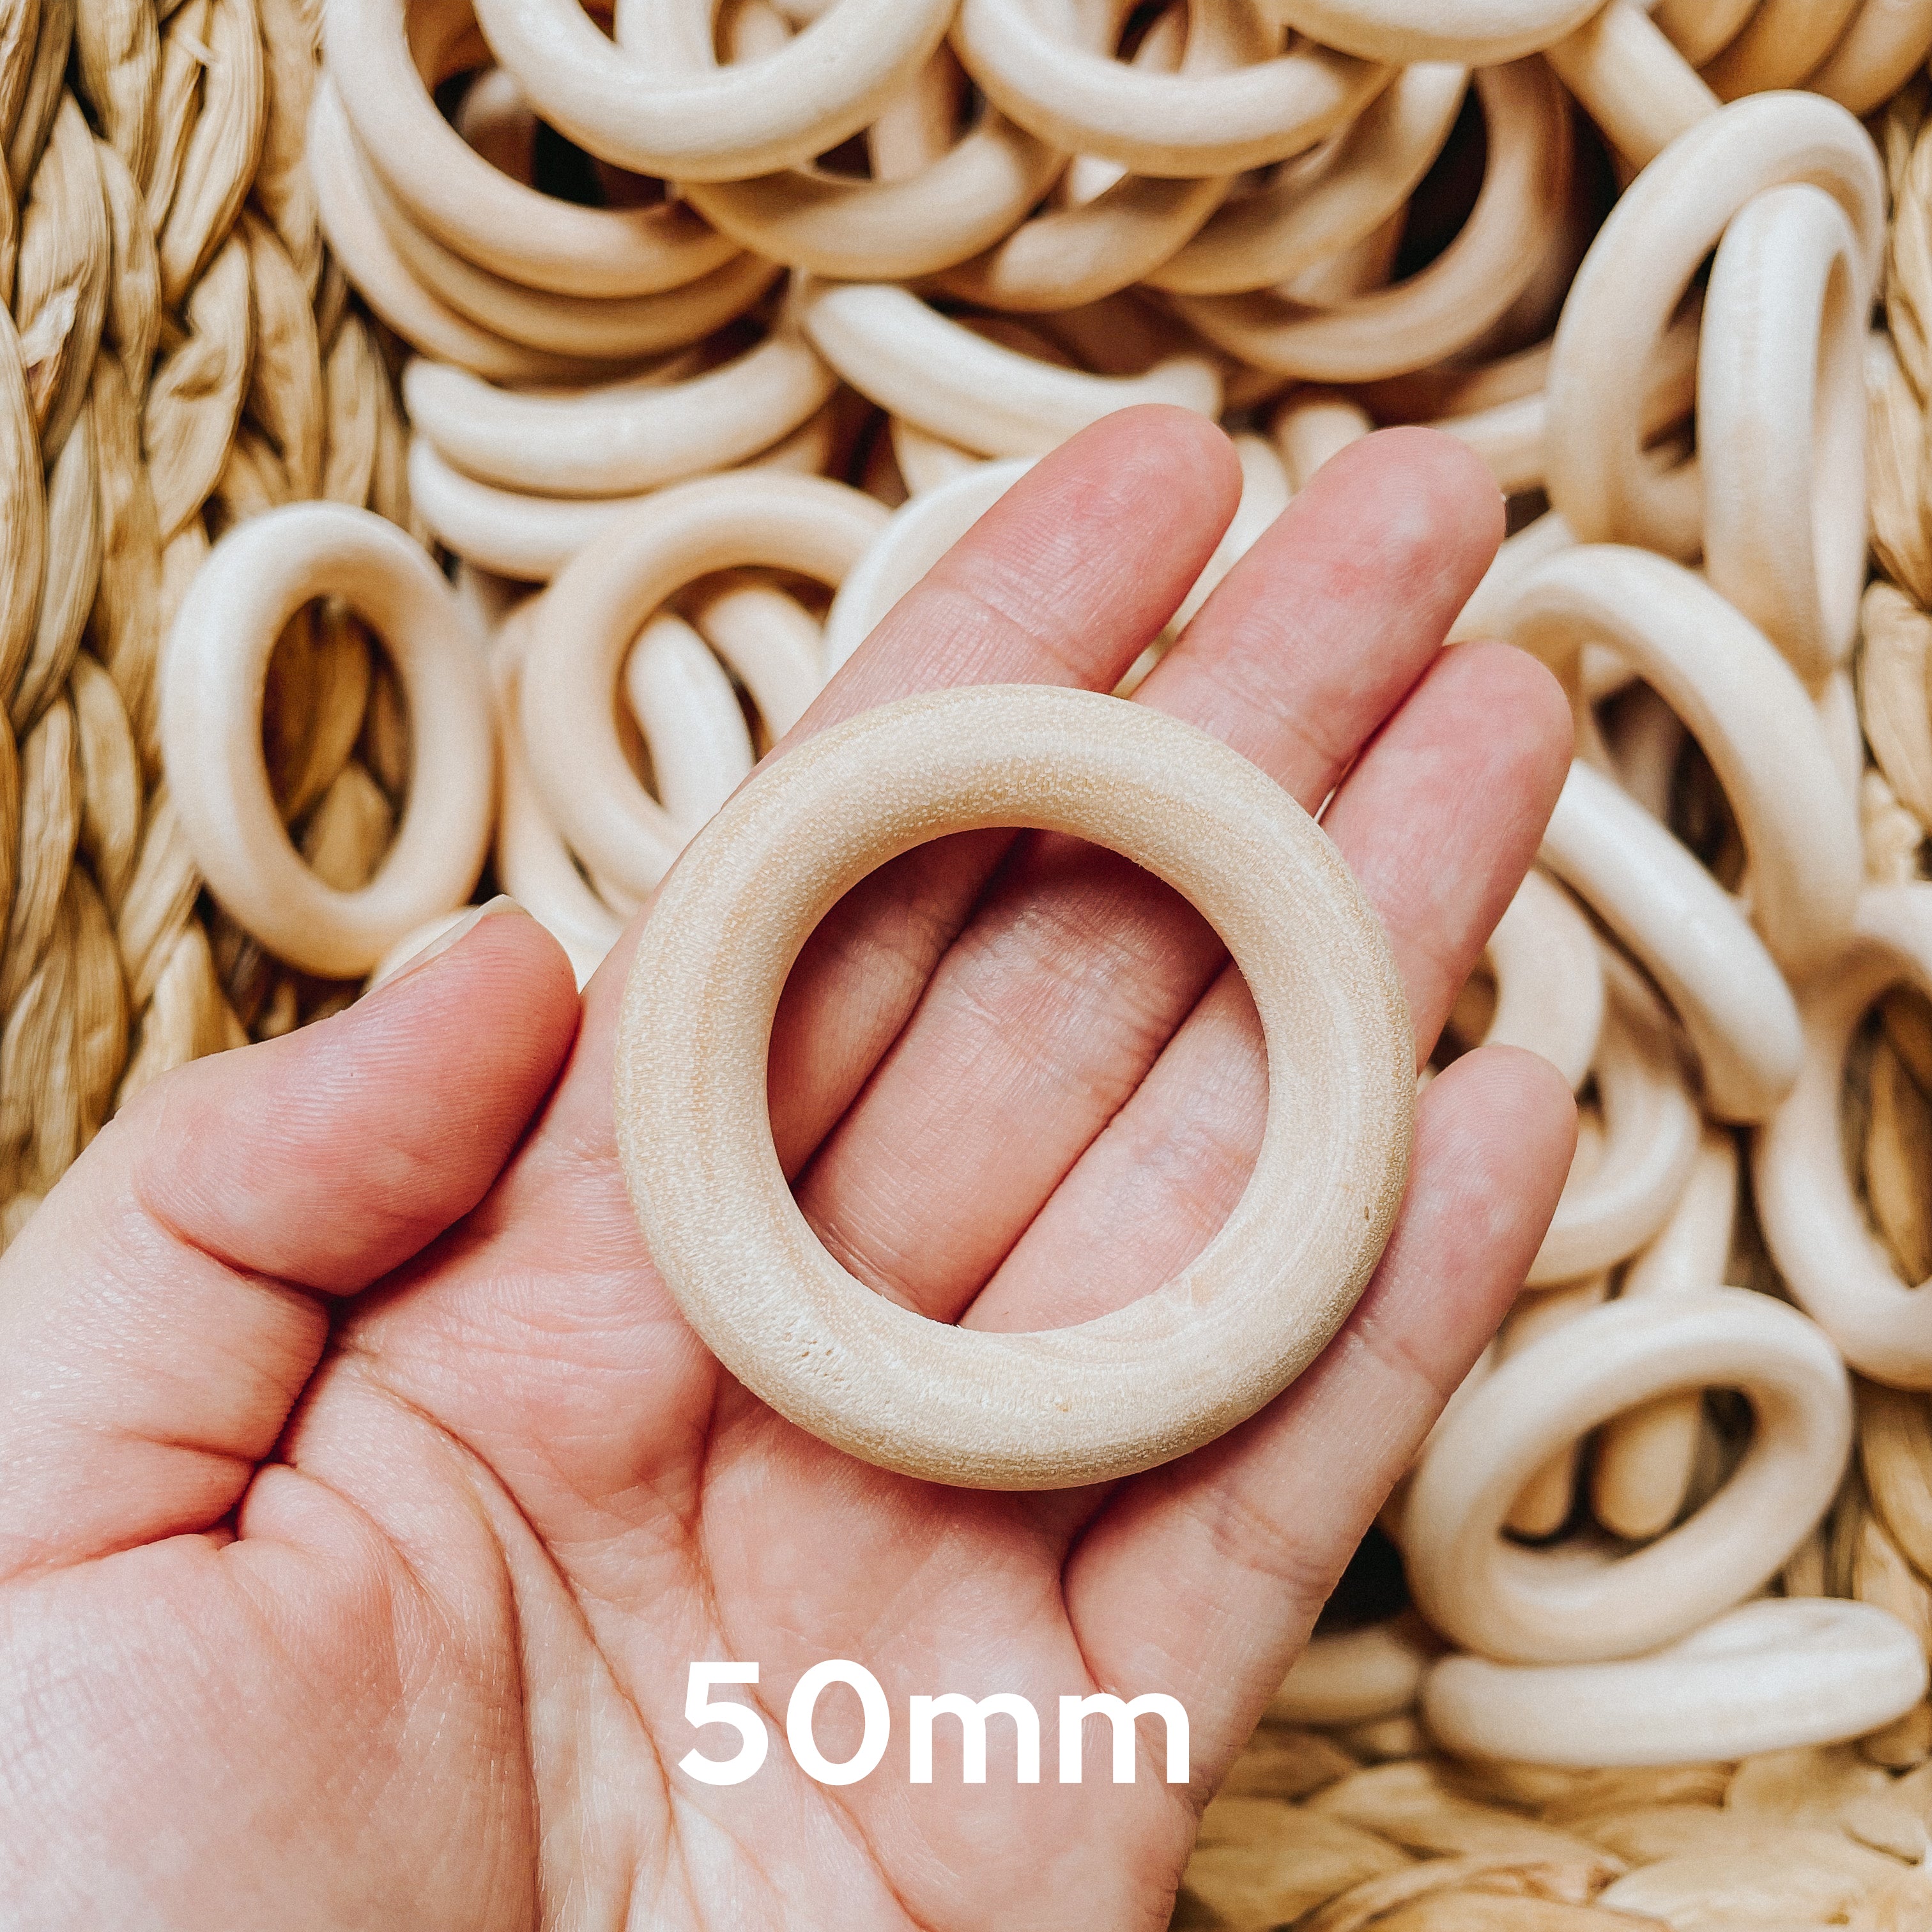 QTY 30 Wooden Rings in Various Sizes, Ring Toss, Silk Streamers